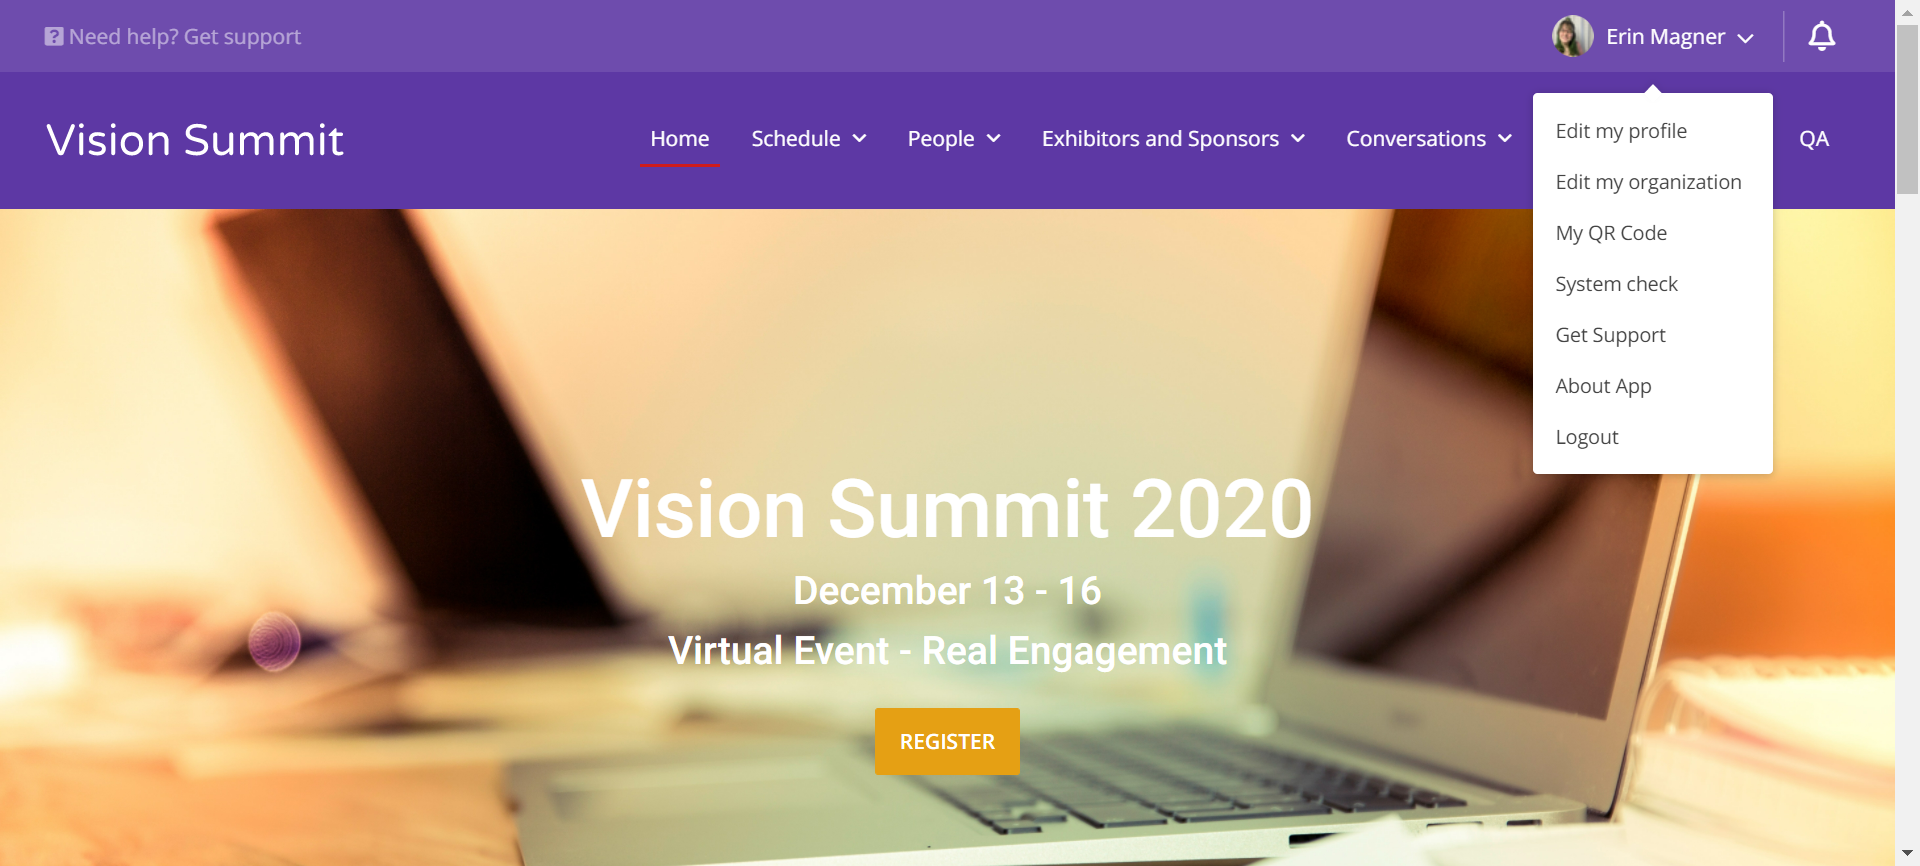 Vision_Summit_Virtual_Event-_App_Home_2021-09-09_12-34-18.png